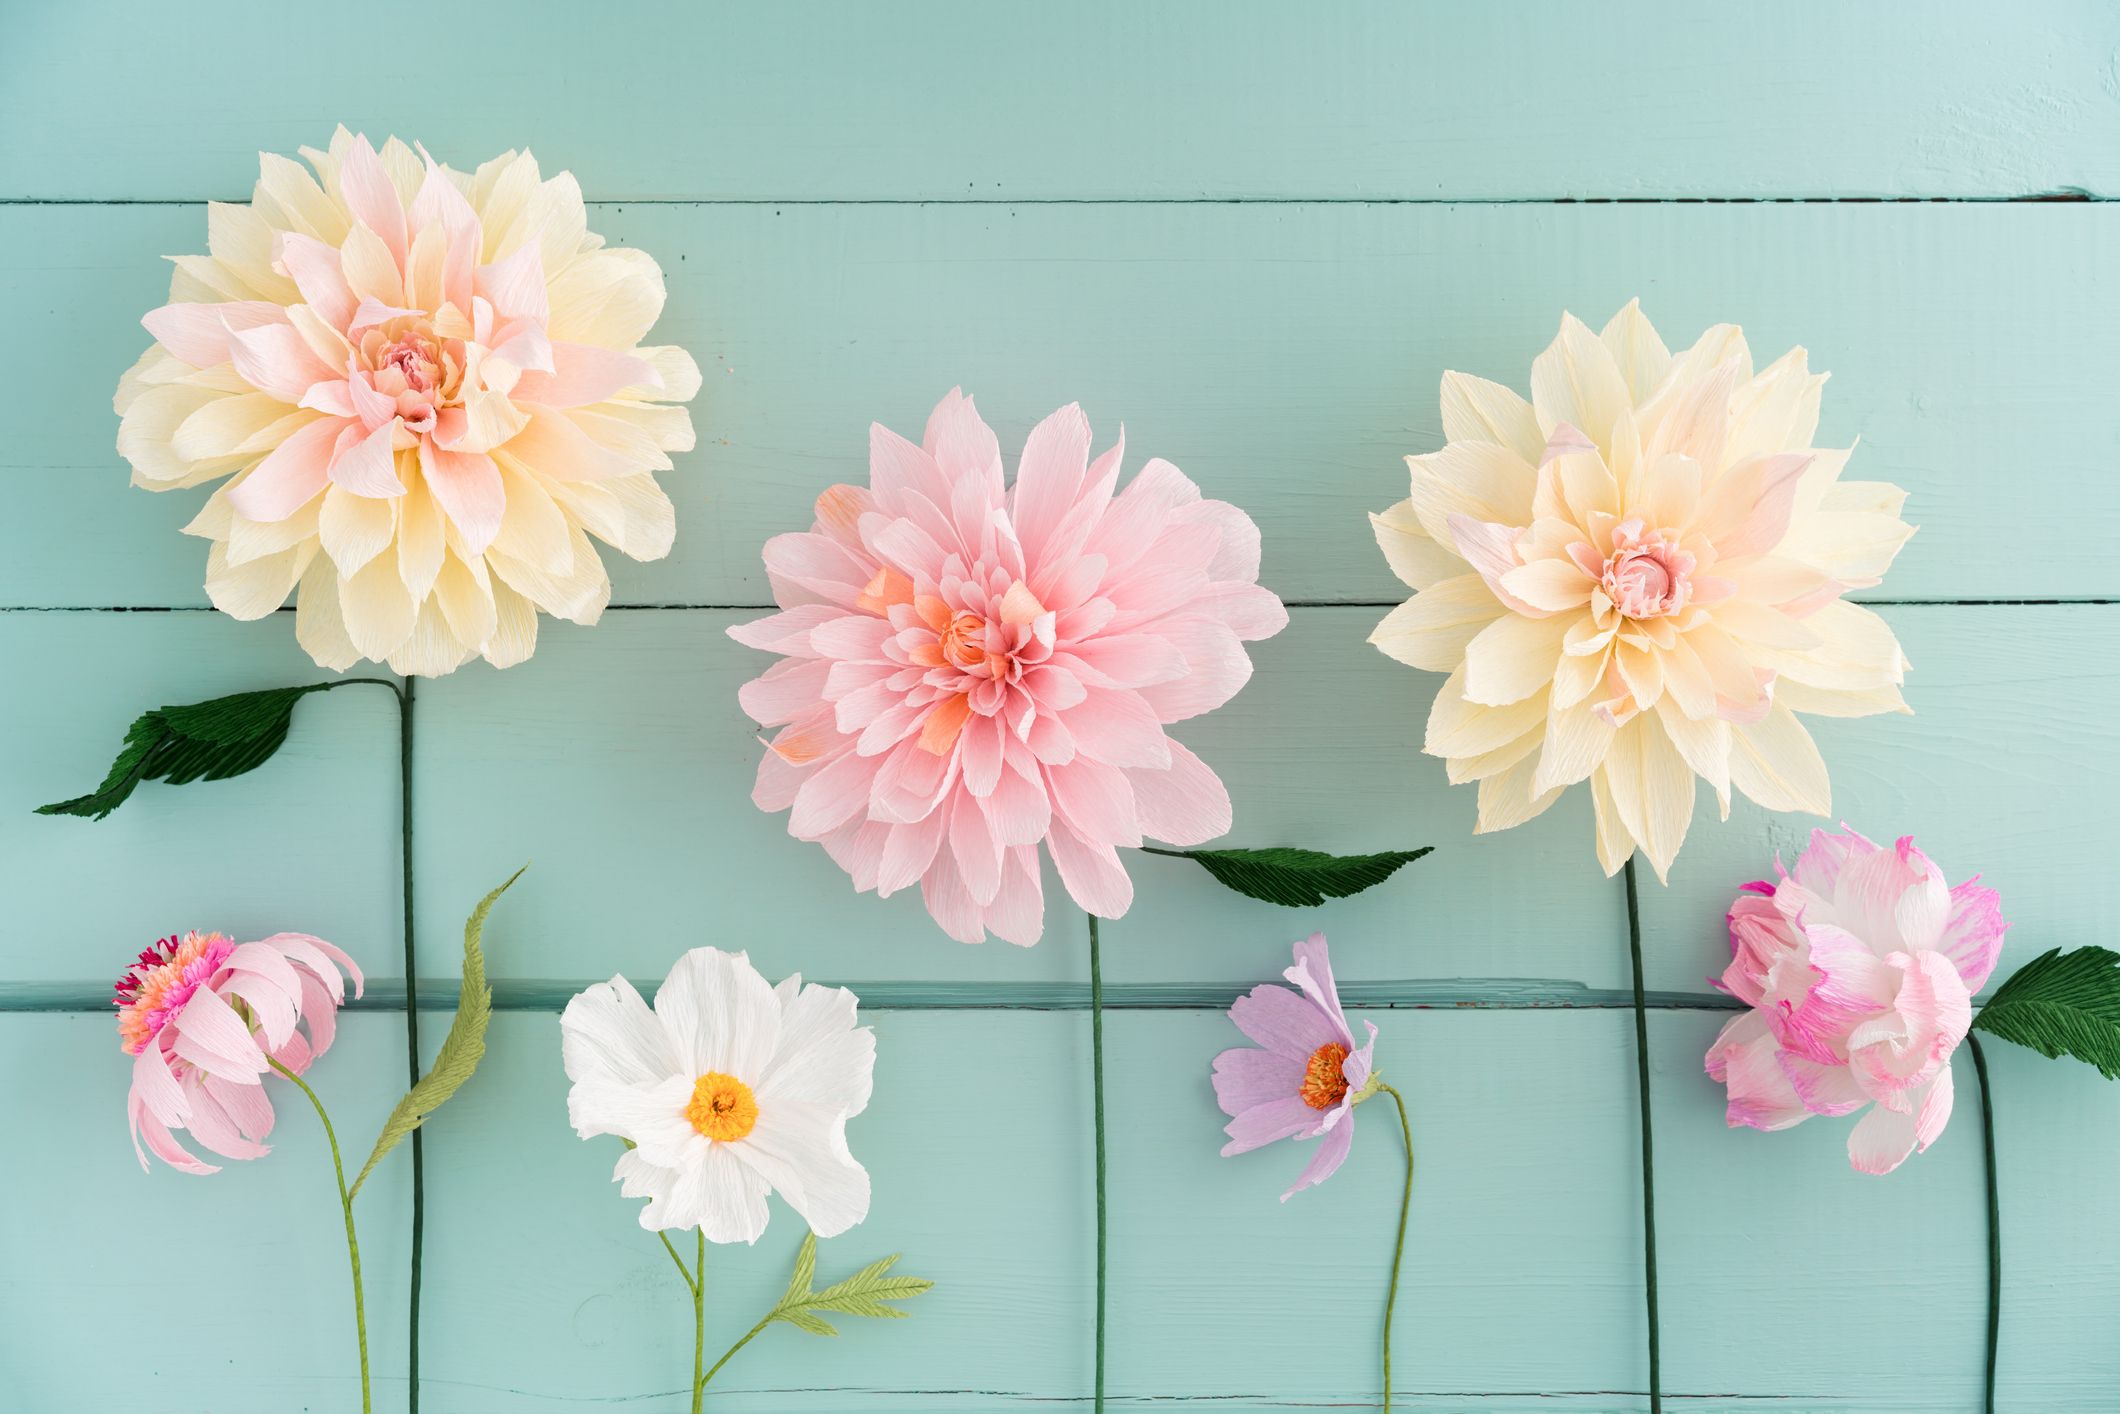 How to Make Paper Flowers